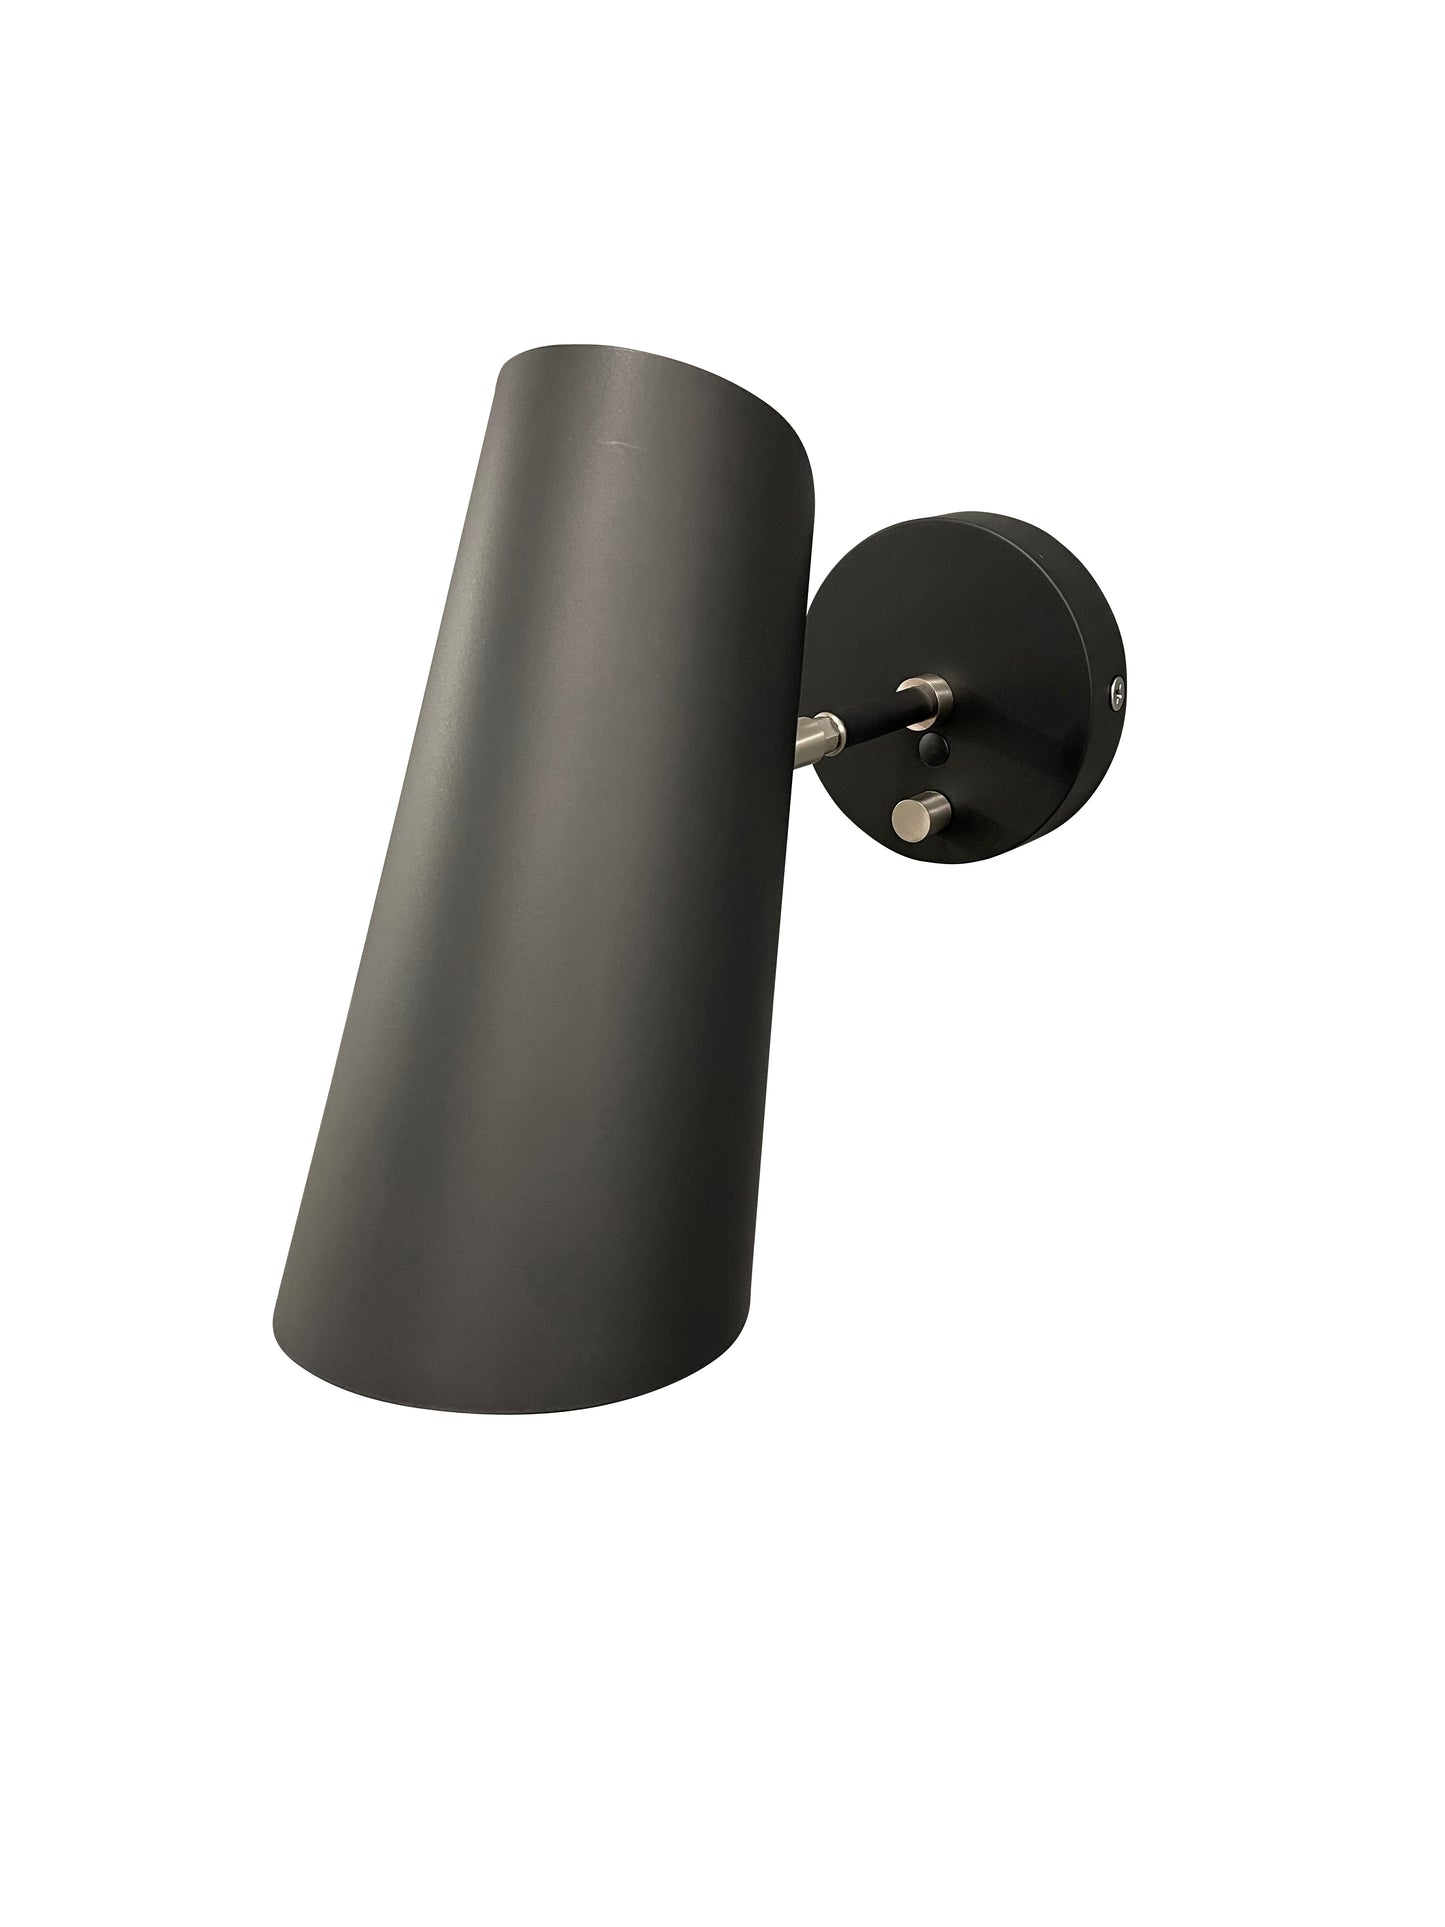 House of Troy Logan Black Satin Nickel Wall Sconce Rolled L325-BLKSN